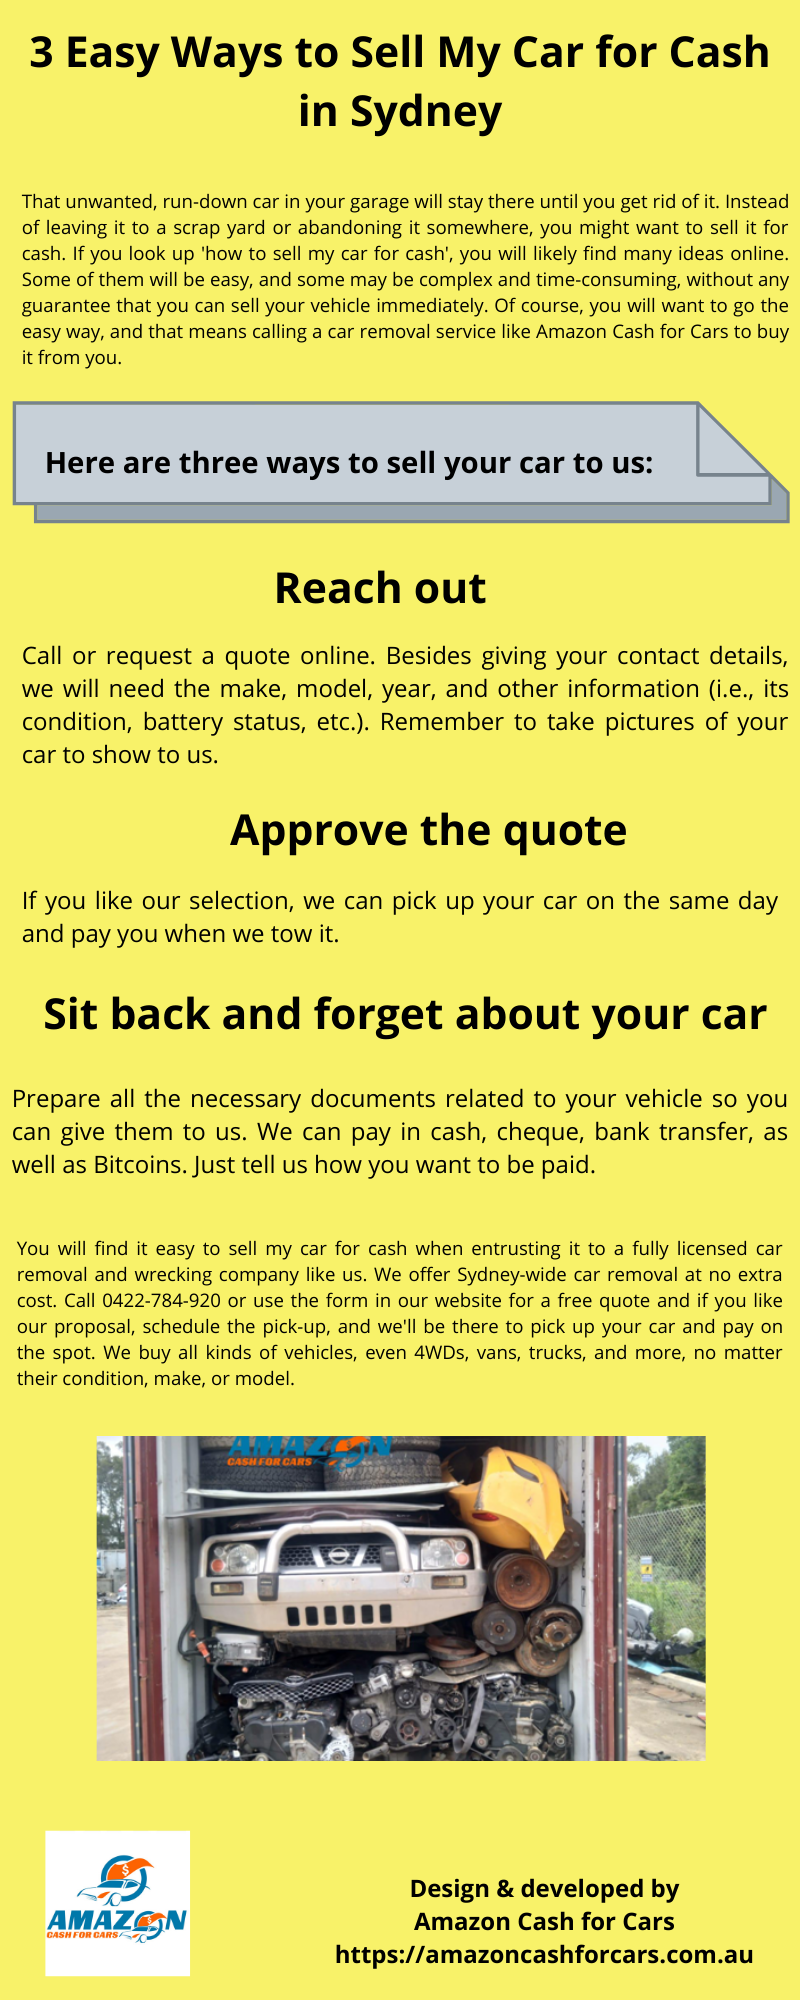 3 Easy Ways to Sell My Car for Cash in Sydney.png  by Amazoncashforcars